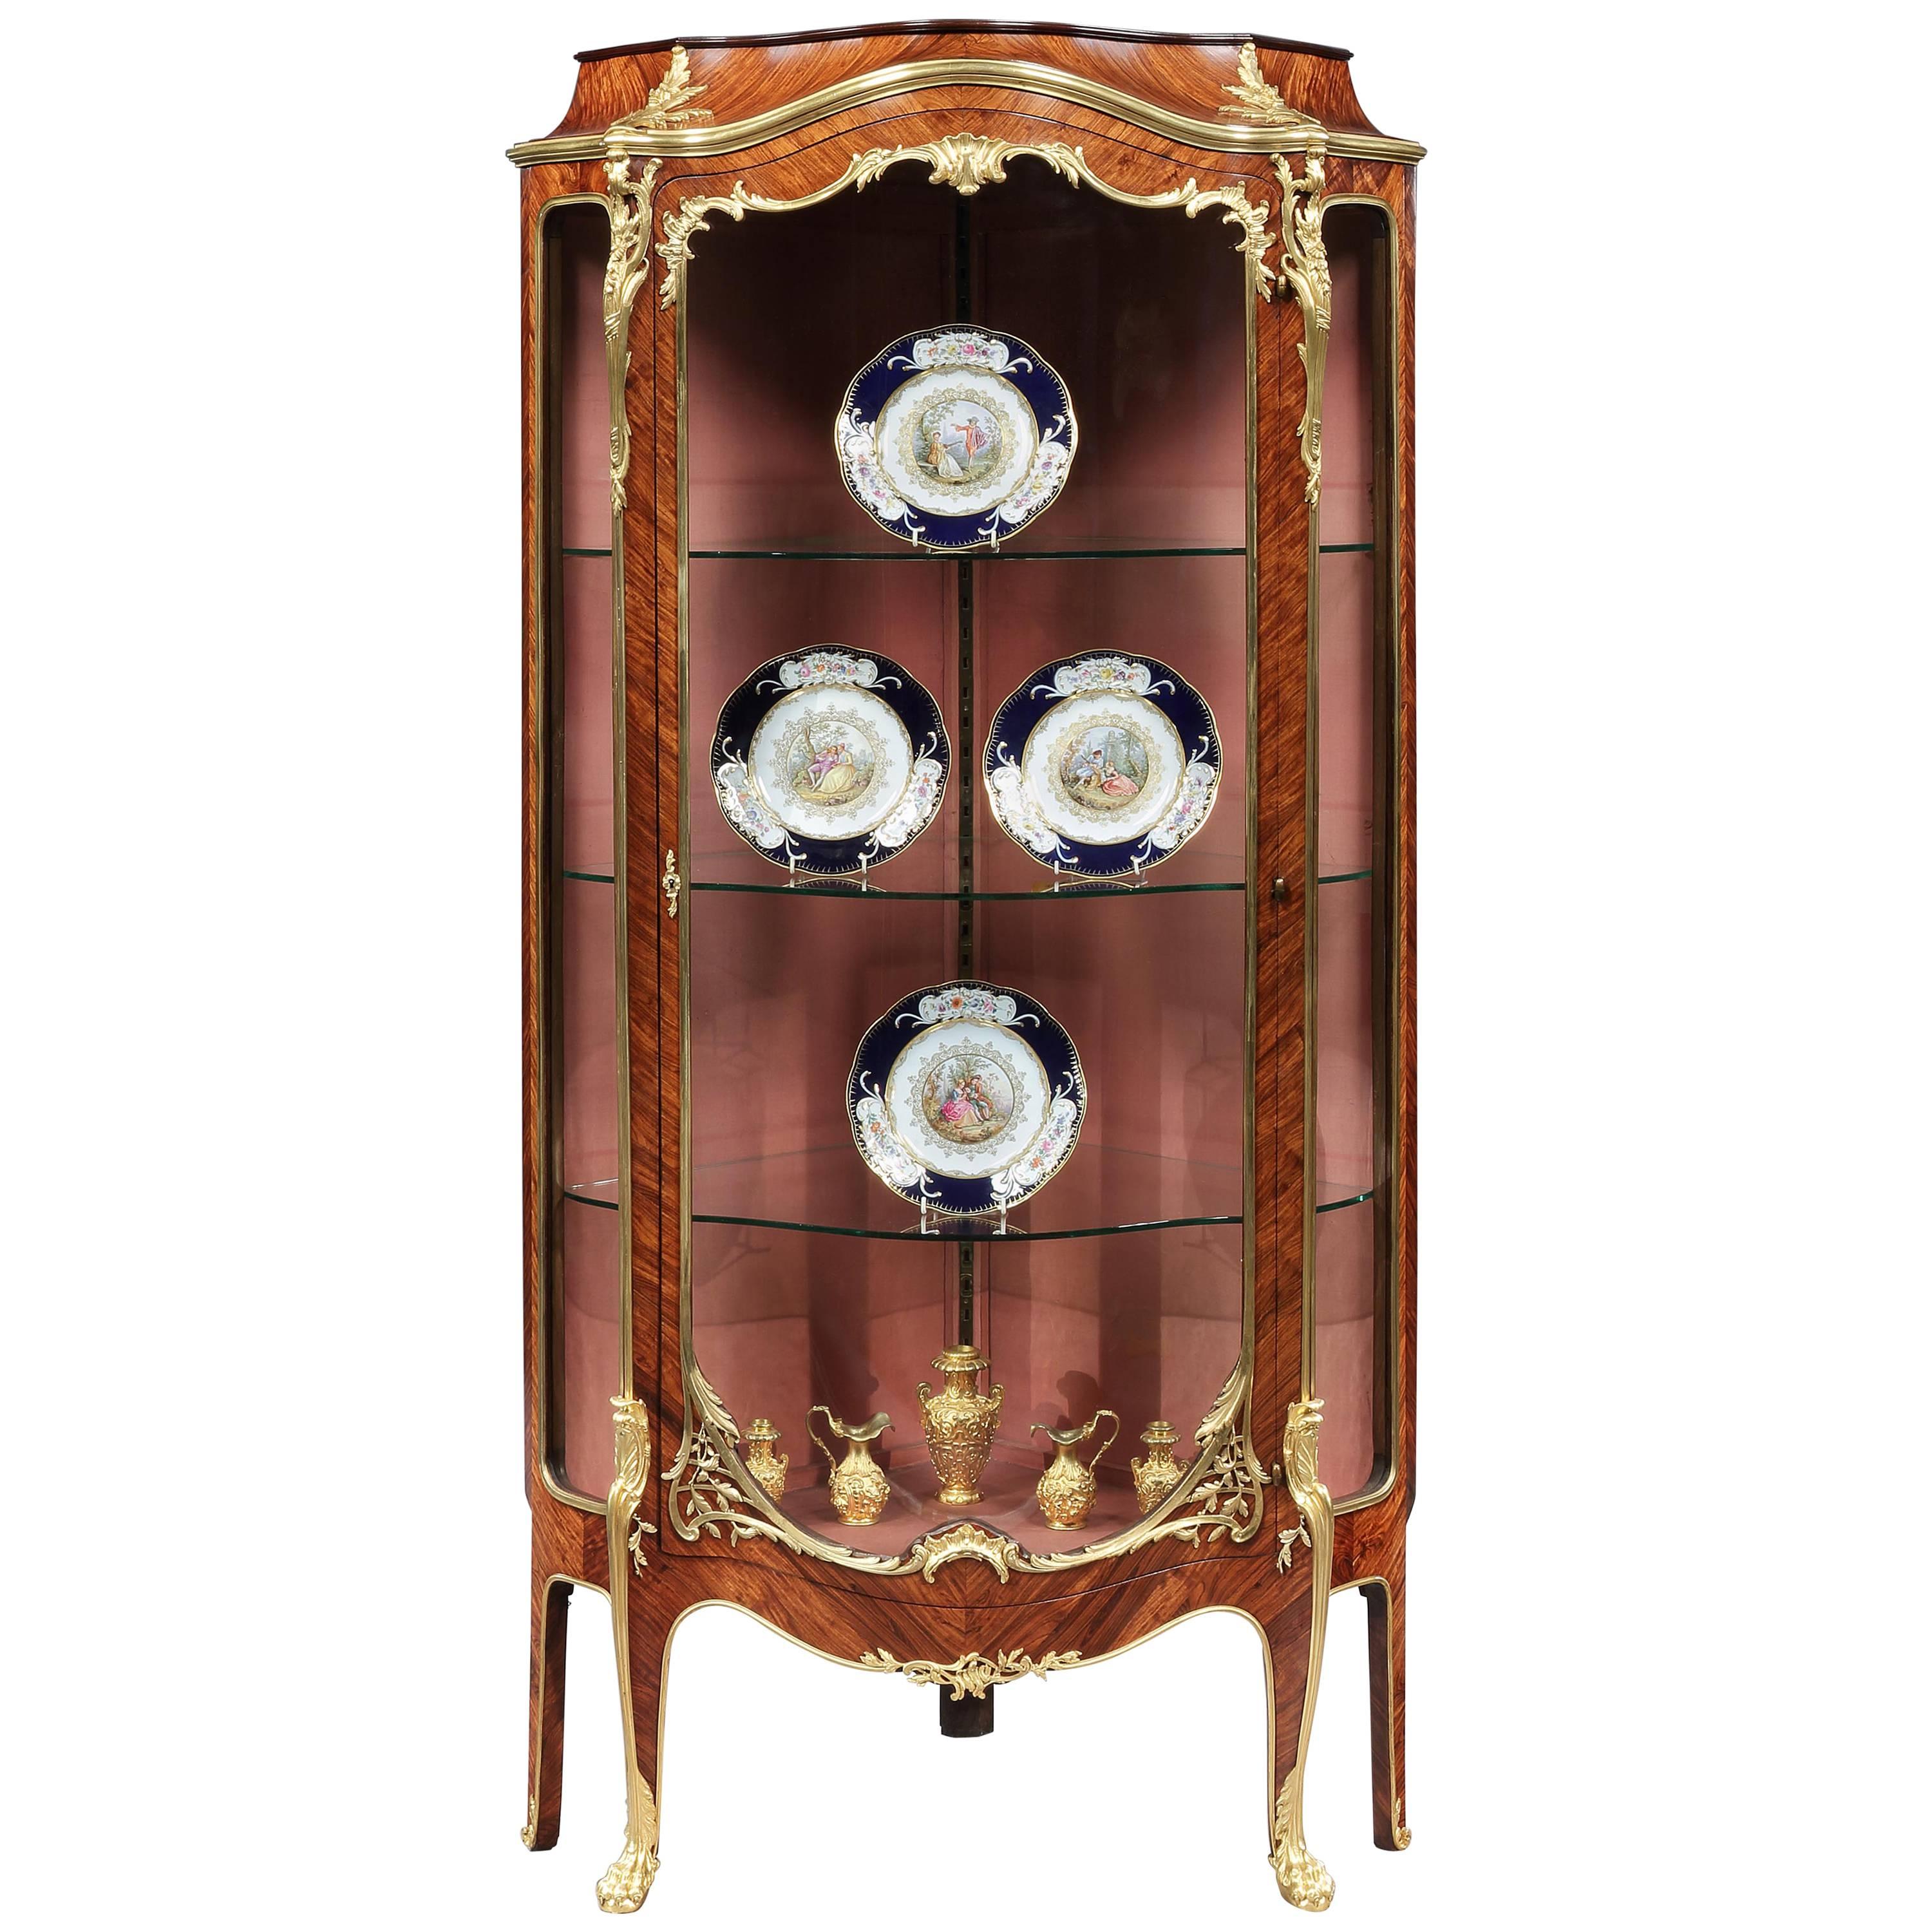 French Corner Display Cabinet with Ormolu Mounts, 19th Century